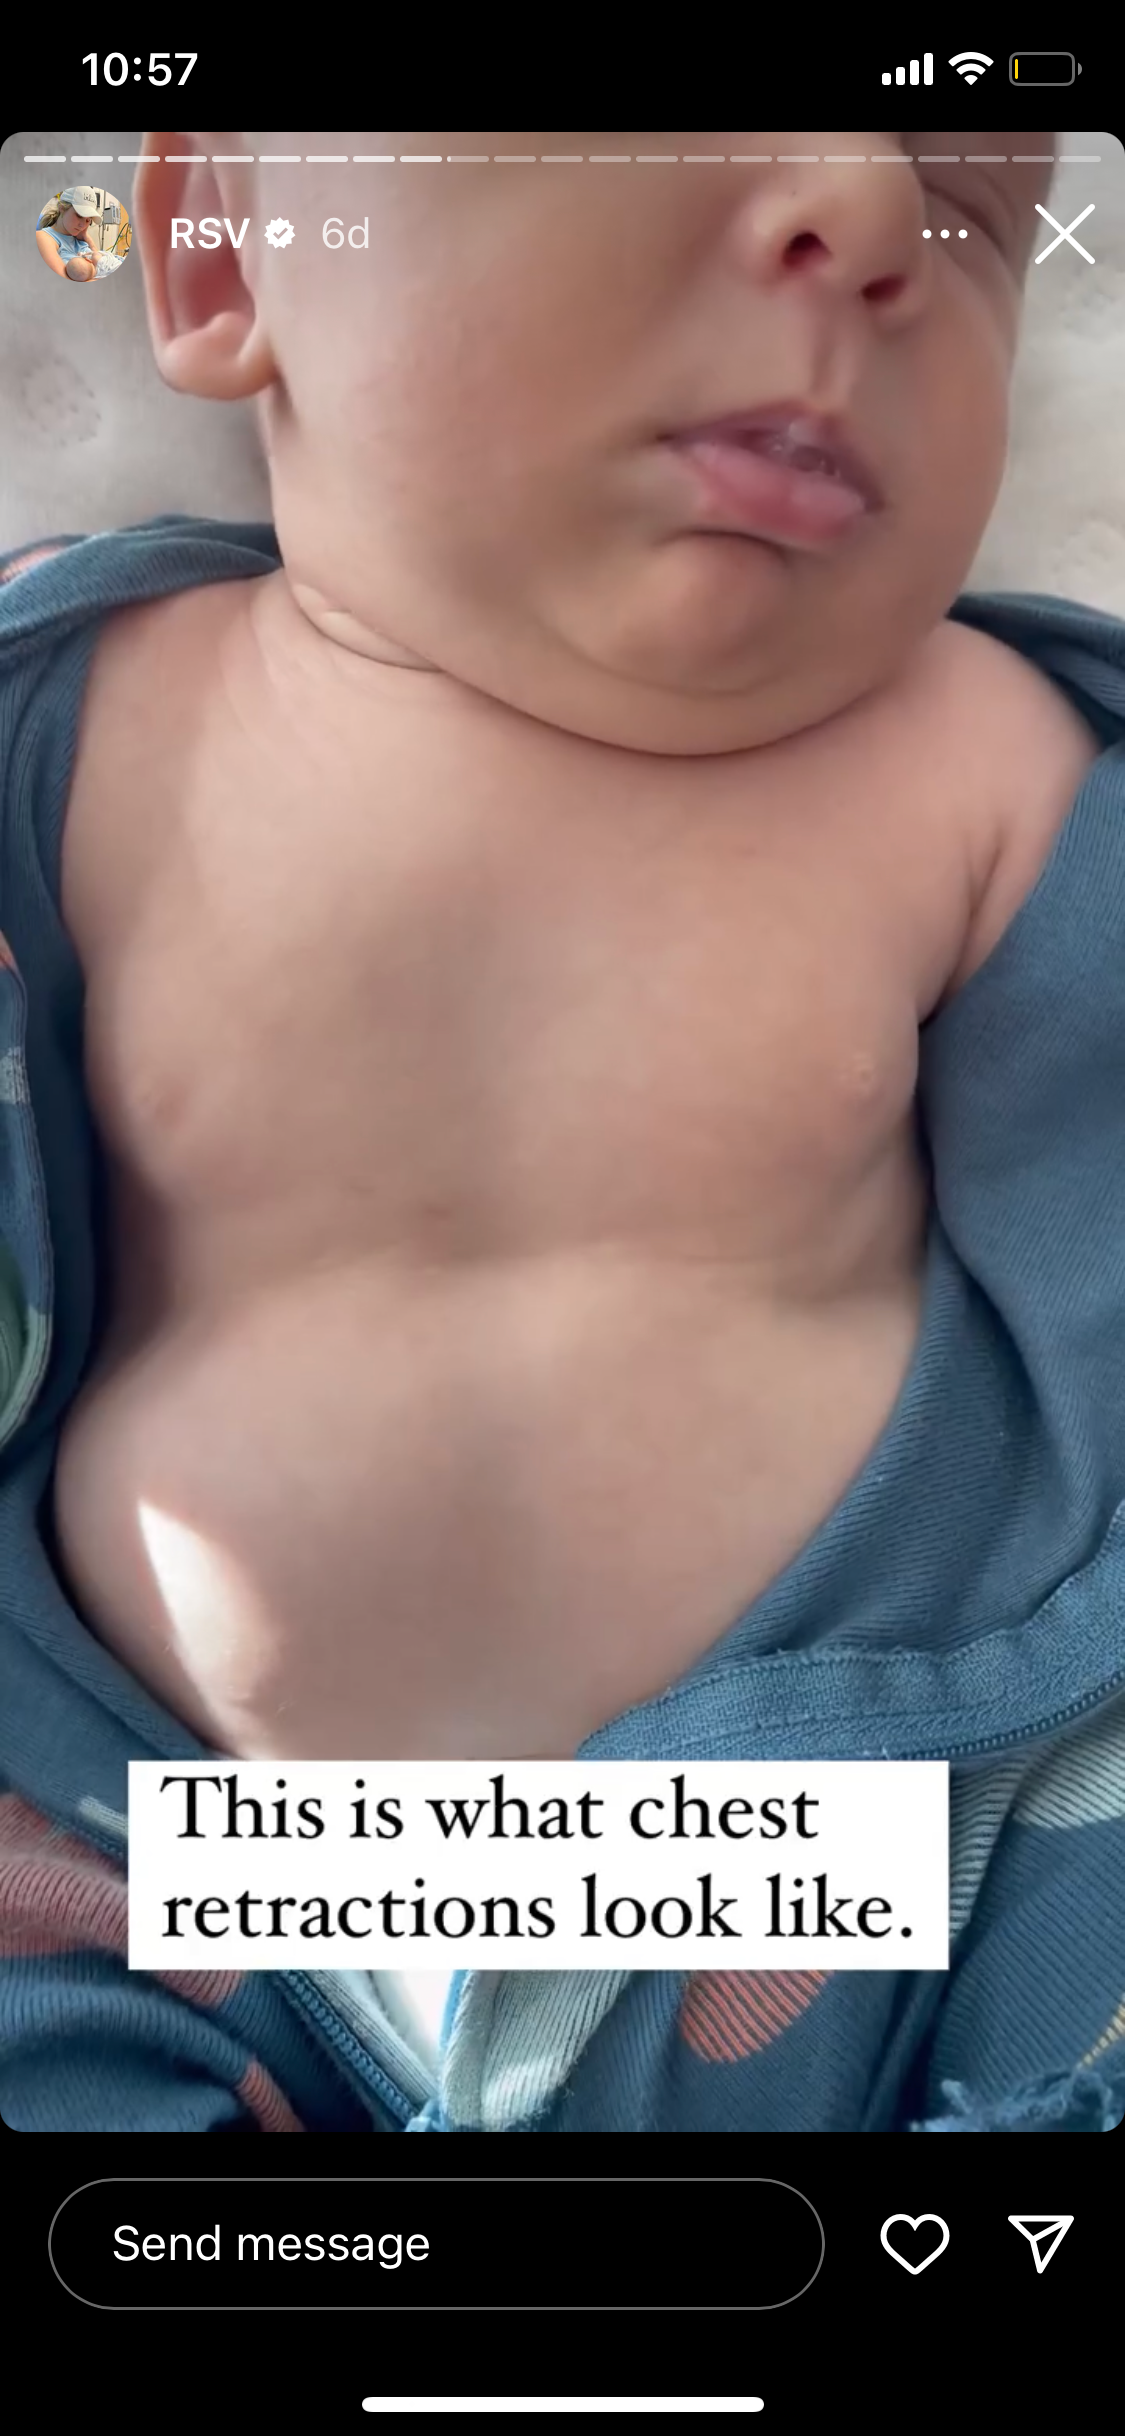 Mother of six shared video of her son experiencing chest retractions